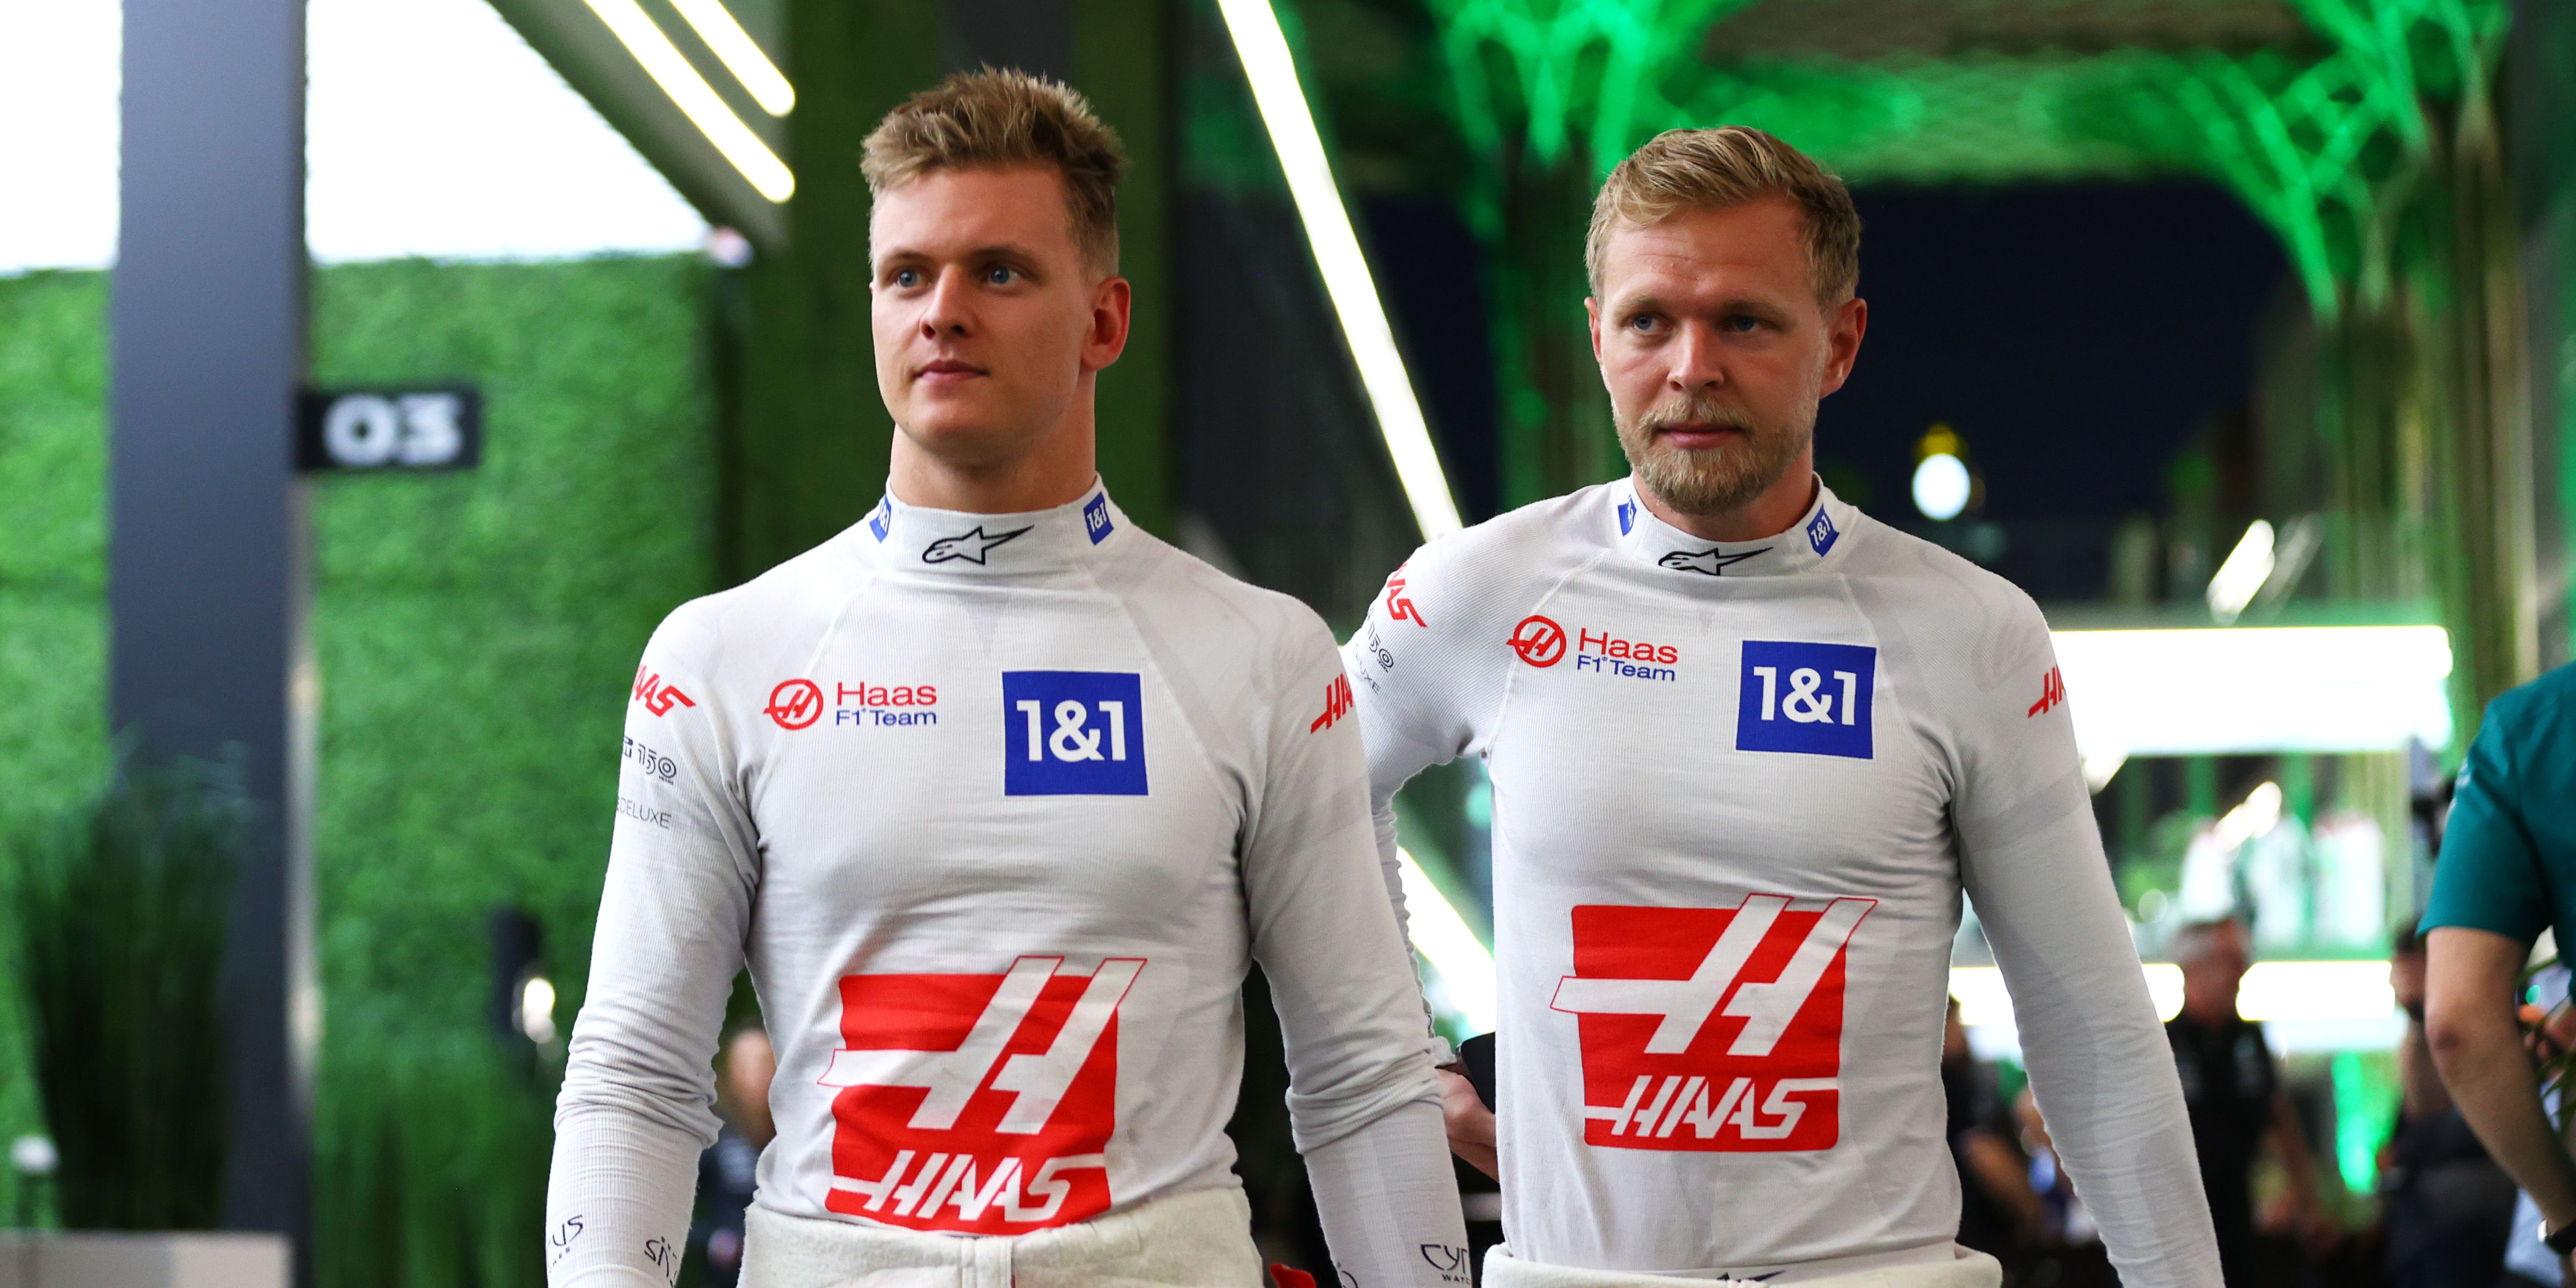 Kevin Magnussen's Return to Haas F1 Raises the Bar, Pressure for Mick Schumacher